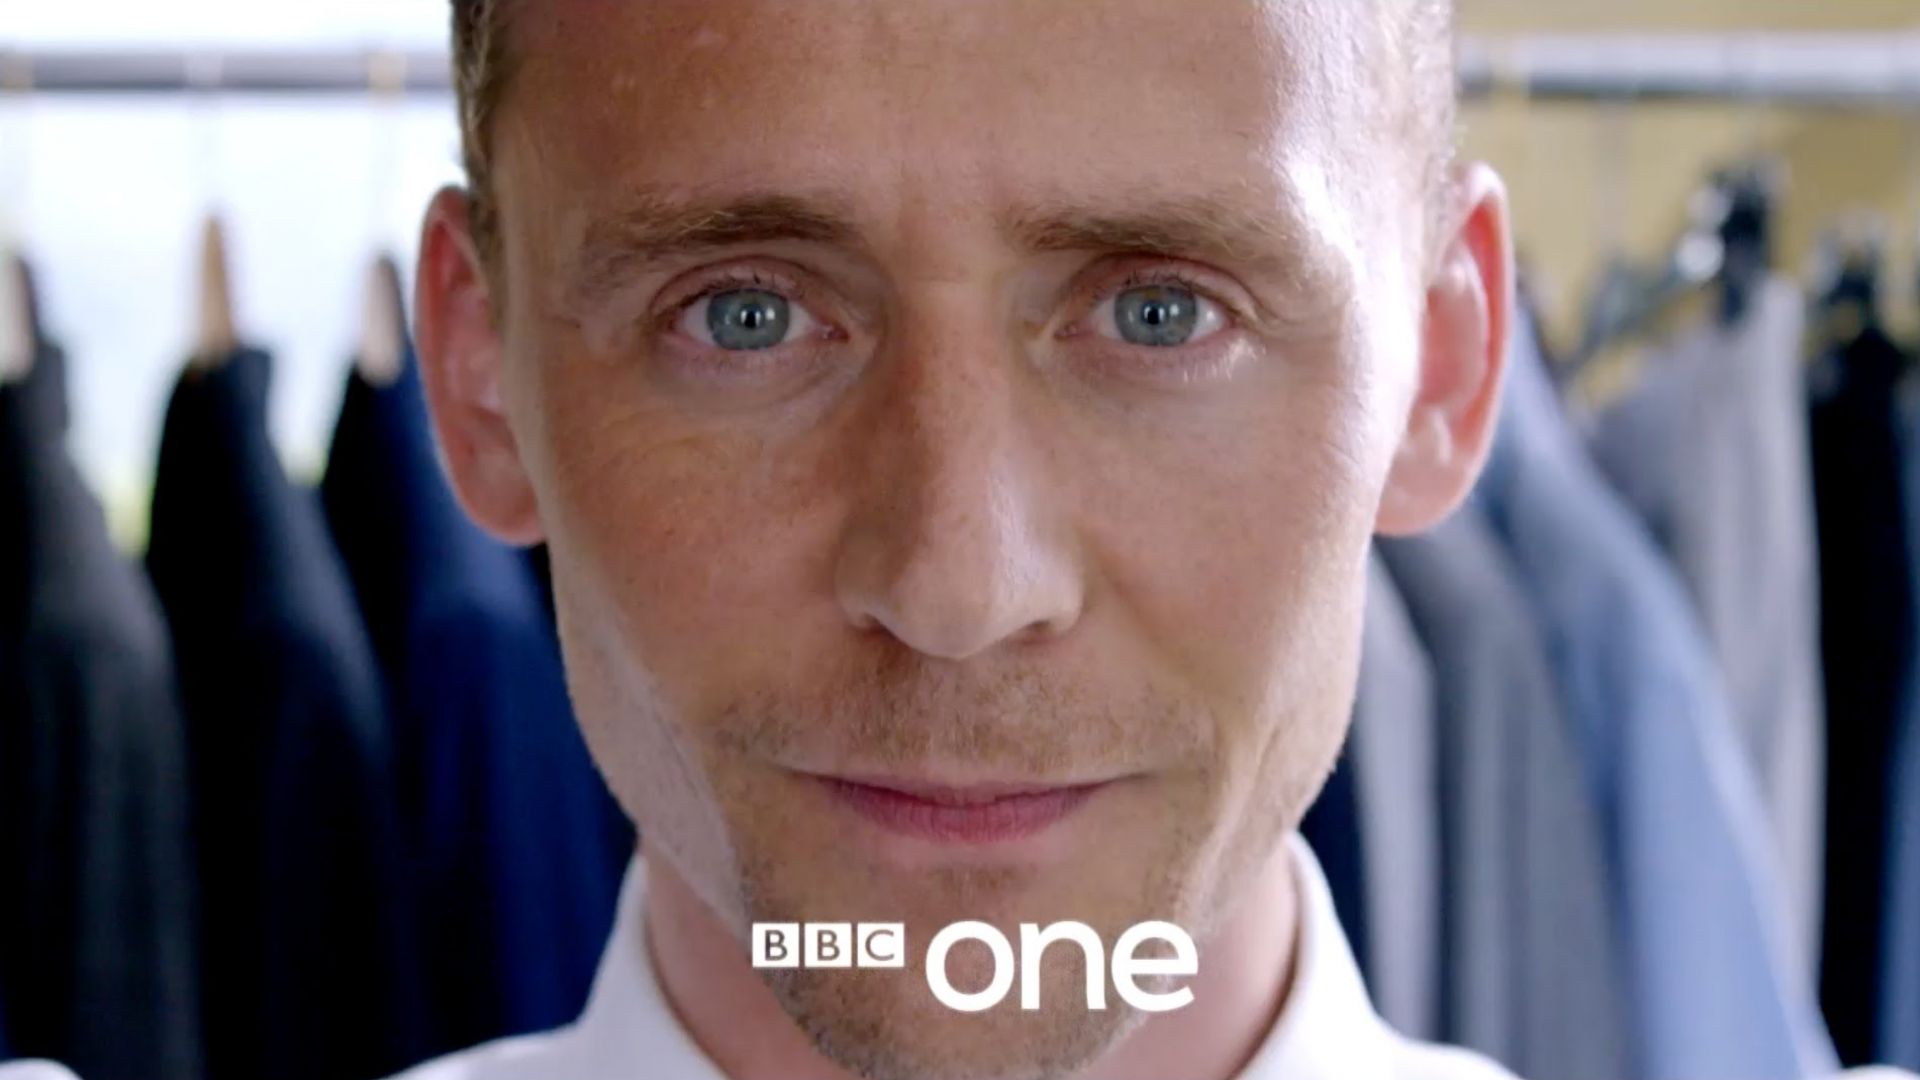 The Night Manager: Trailer - Tom Hiddleston and Hugh Laurie 